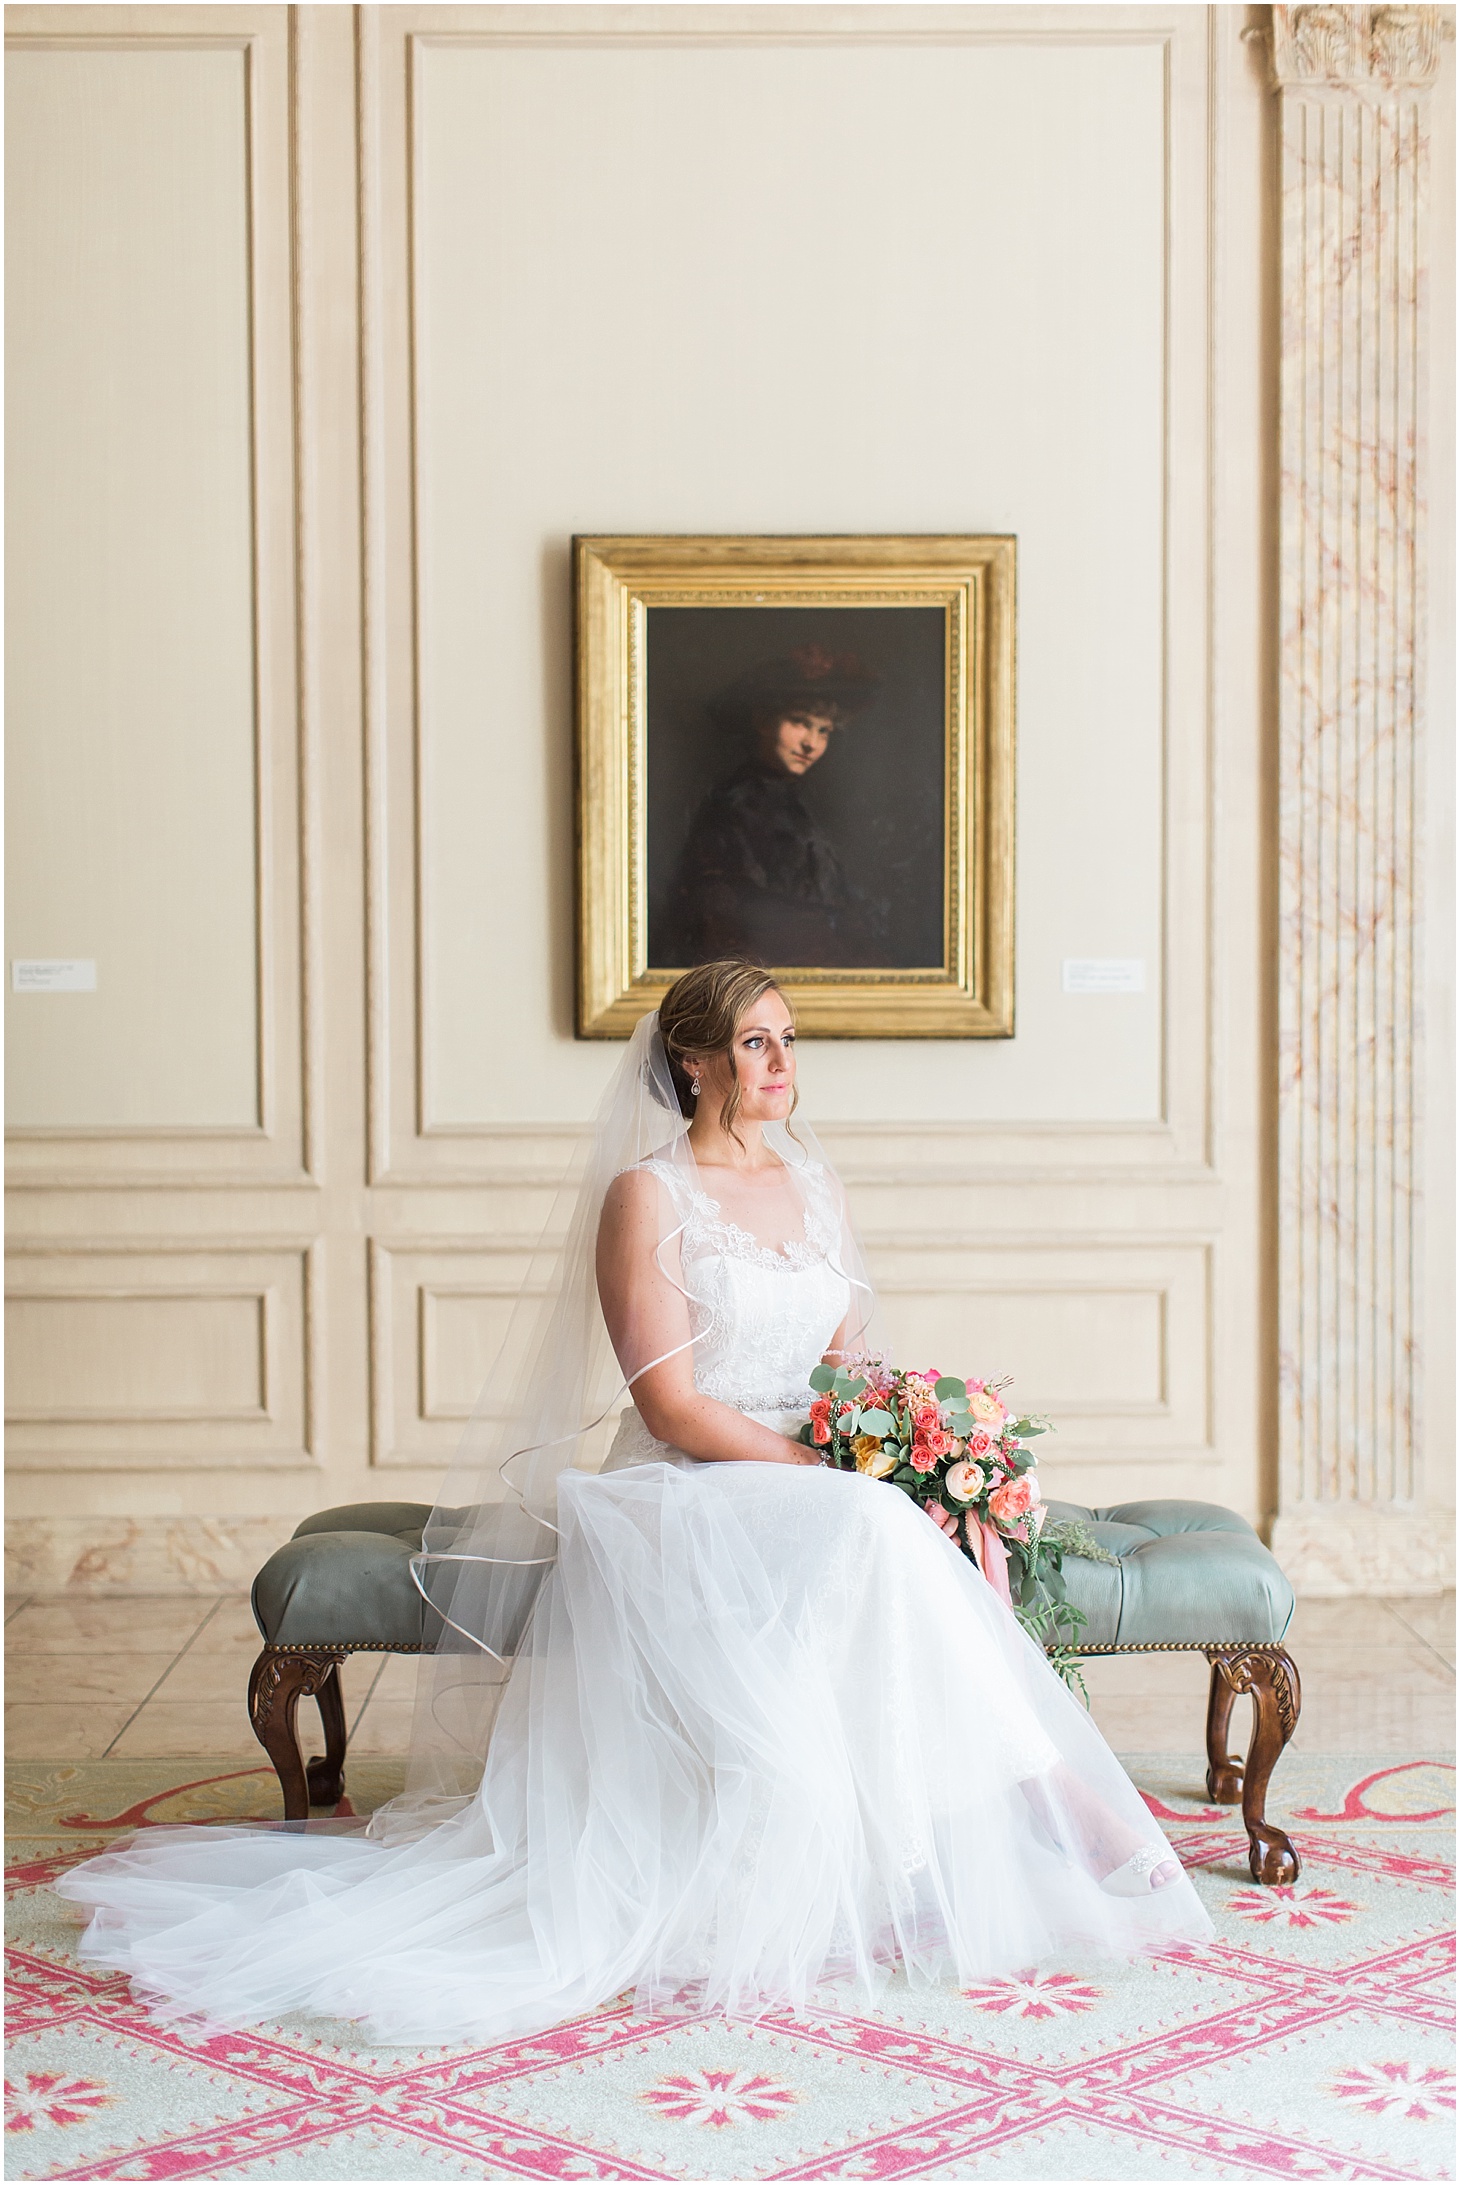 Bridal Portrait at the National Museum of Women in the Arts | Interfaith DC Wedding by Sarah Bradshaw Photography